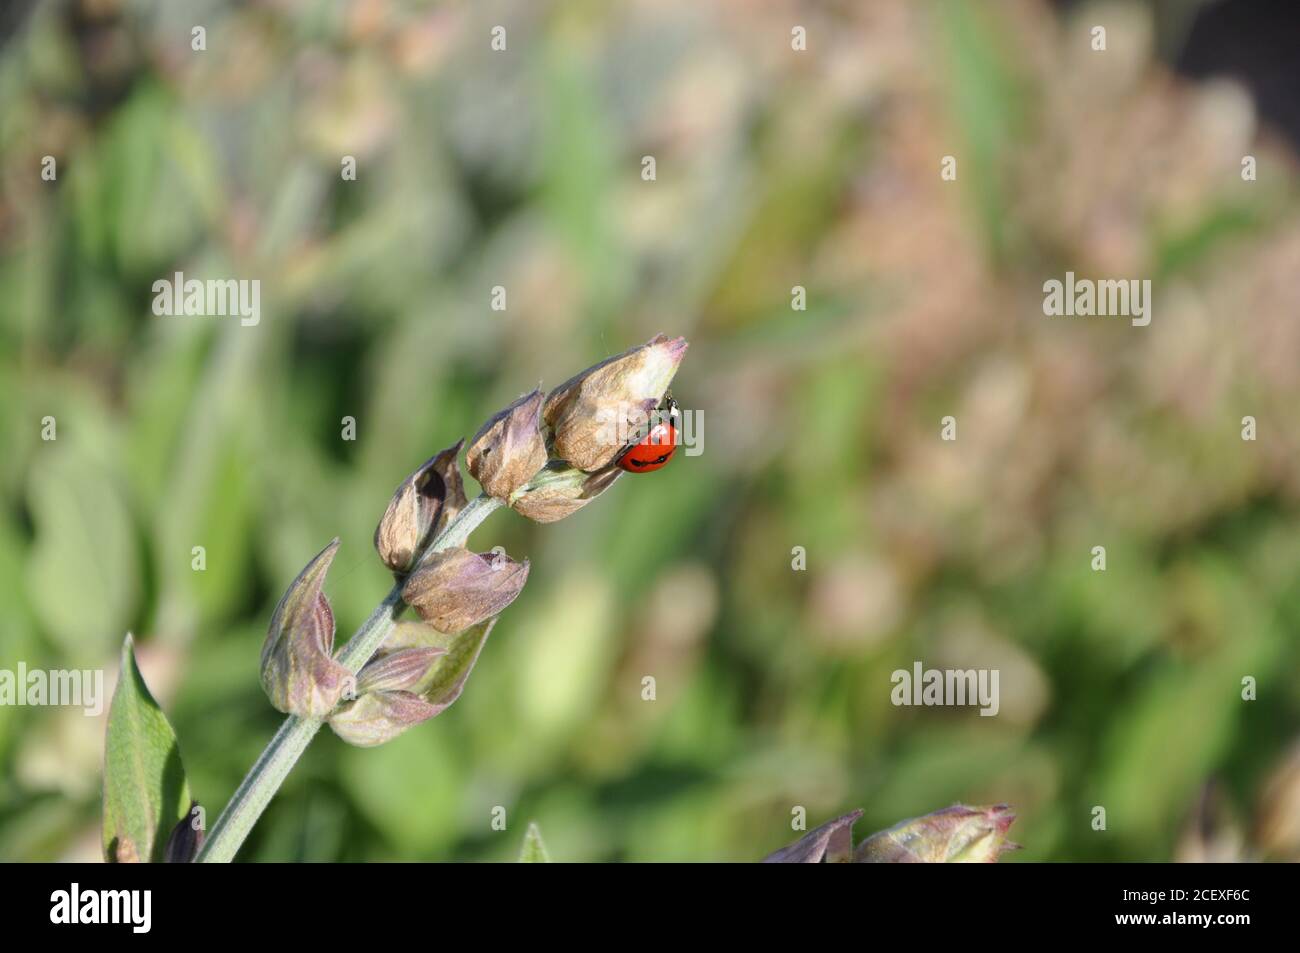 Red lady bug on flower with green background. Stock Photo